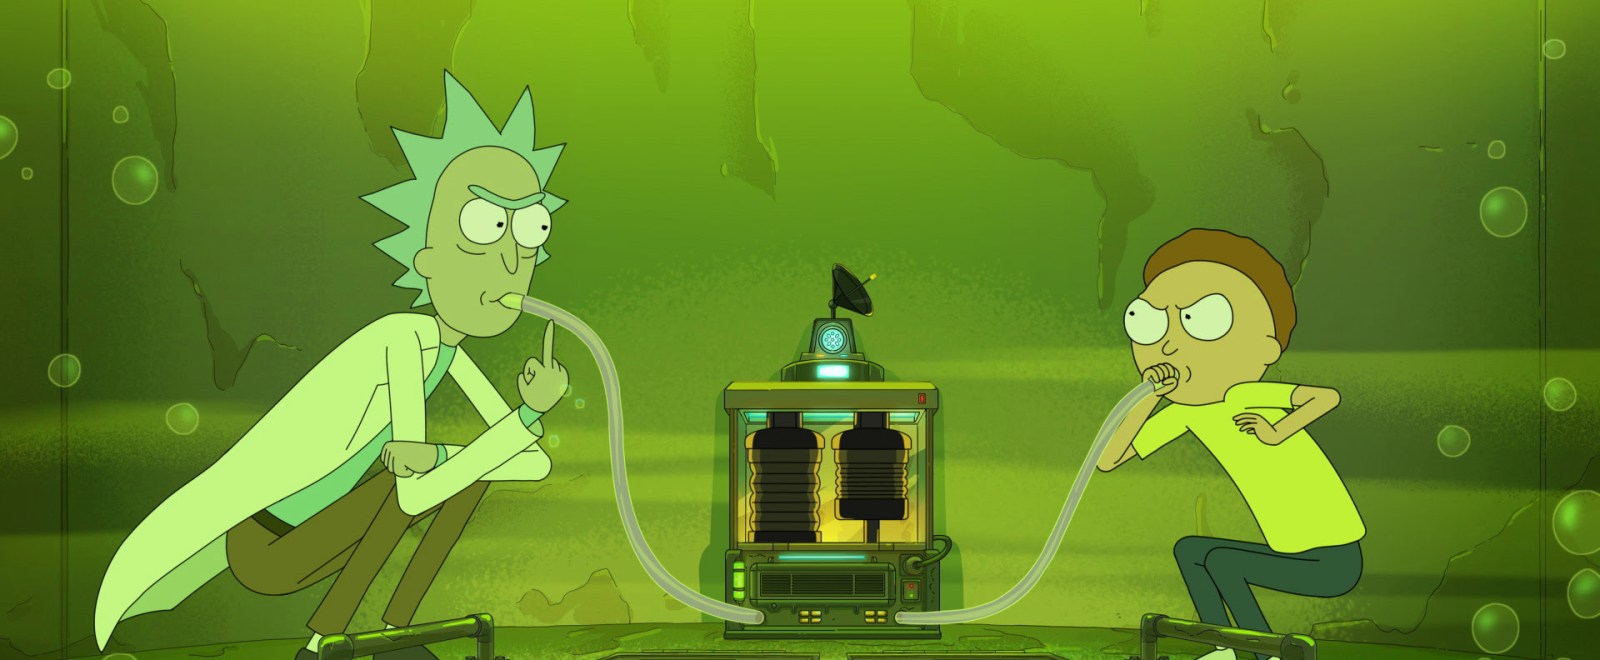 Rick And Morty S Season 5 Guest Stars Include A Community Favorite And Timothy Olyphant - jacky moto aquatica brawl stars